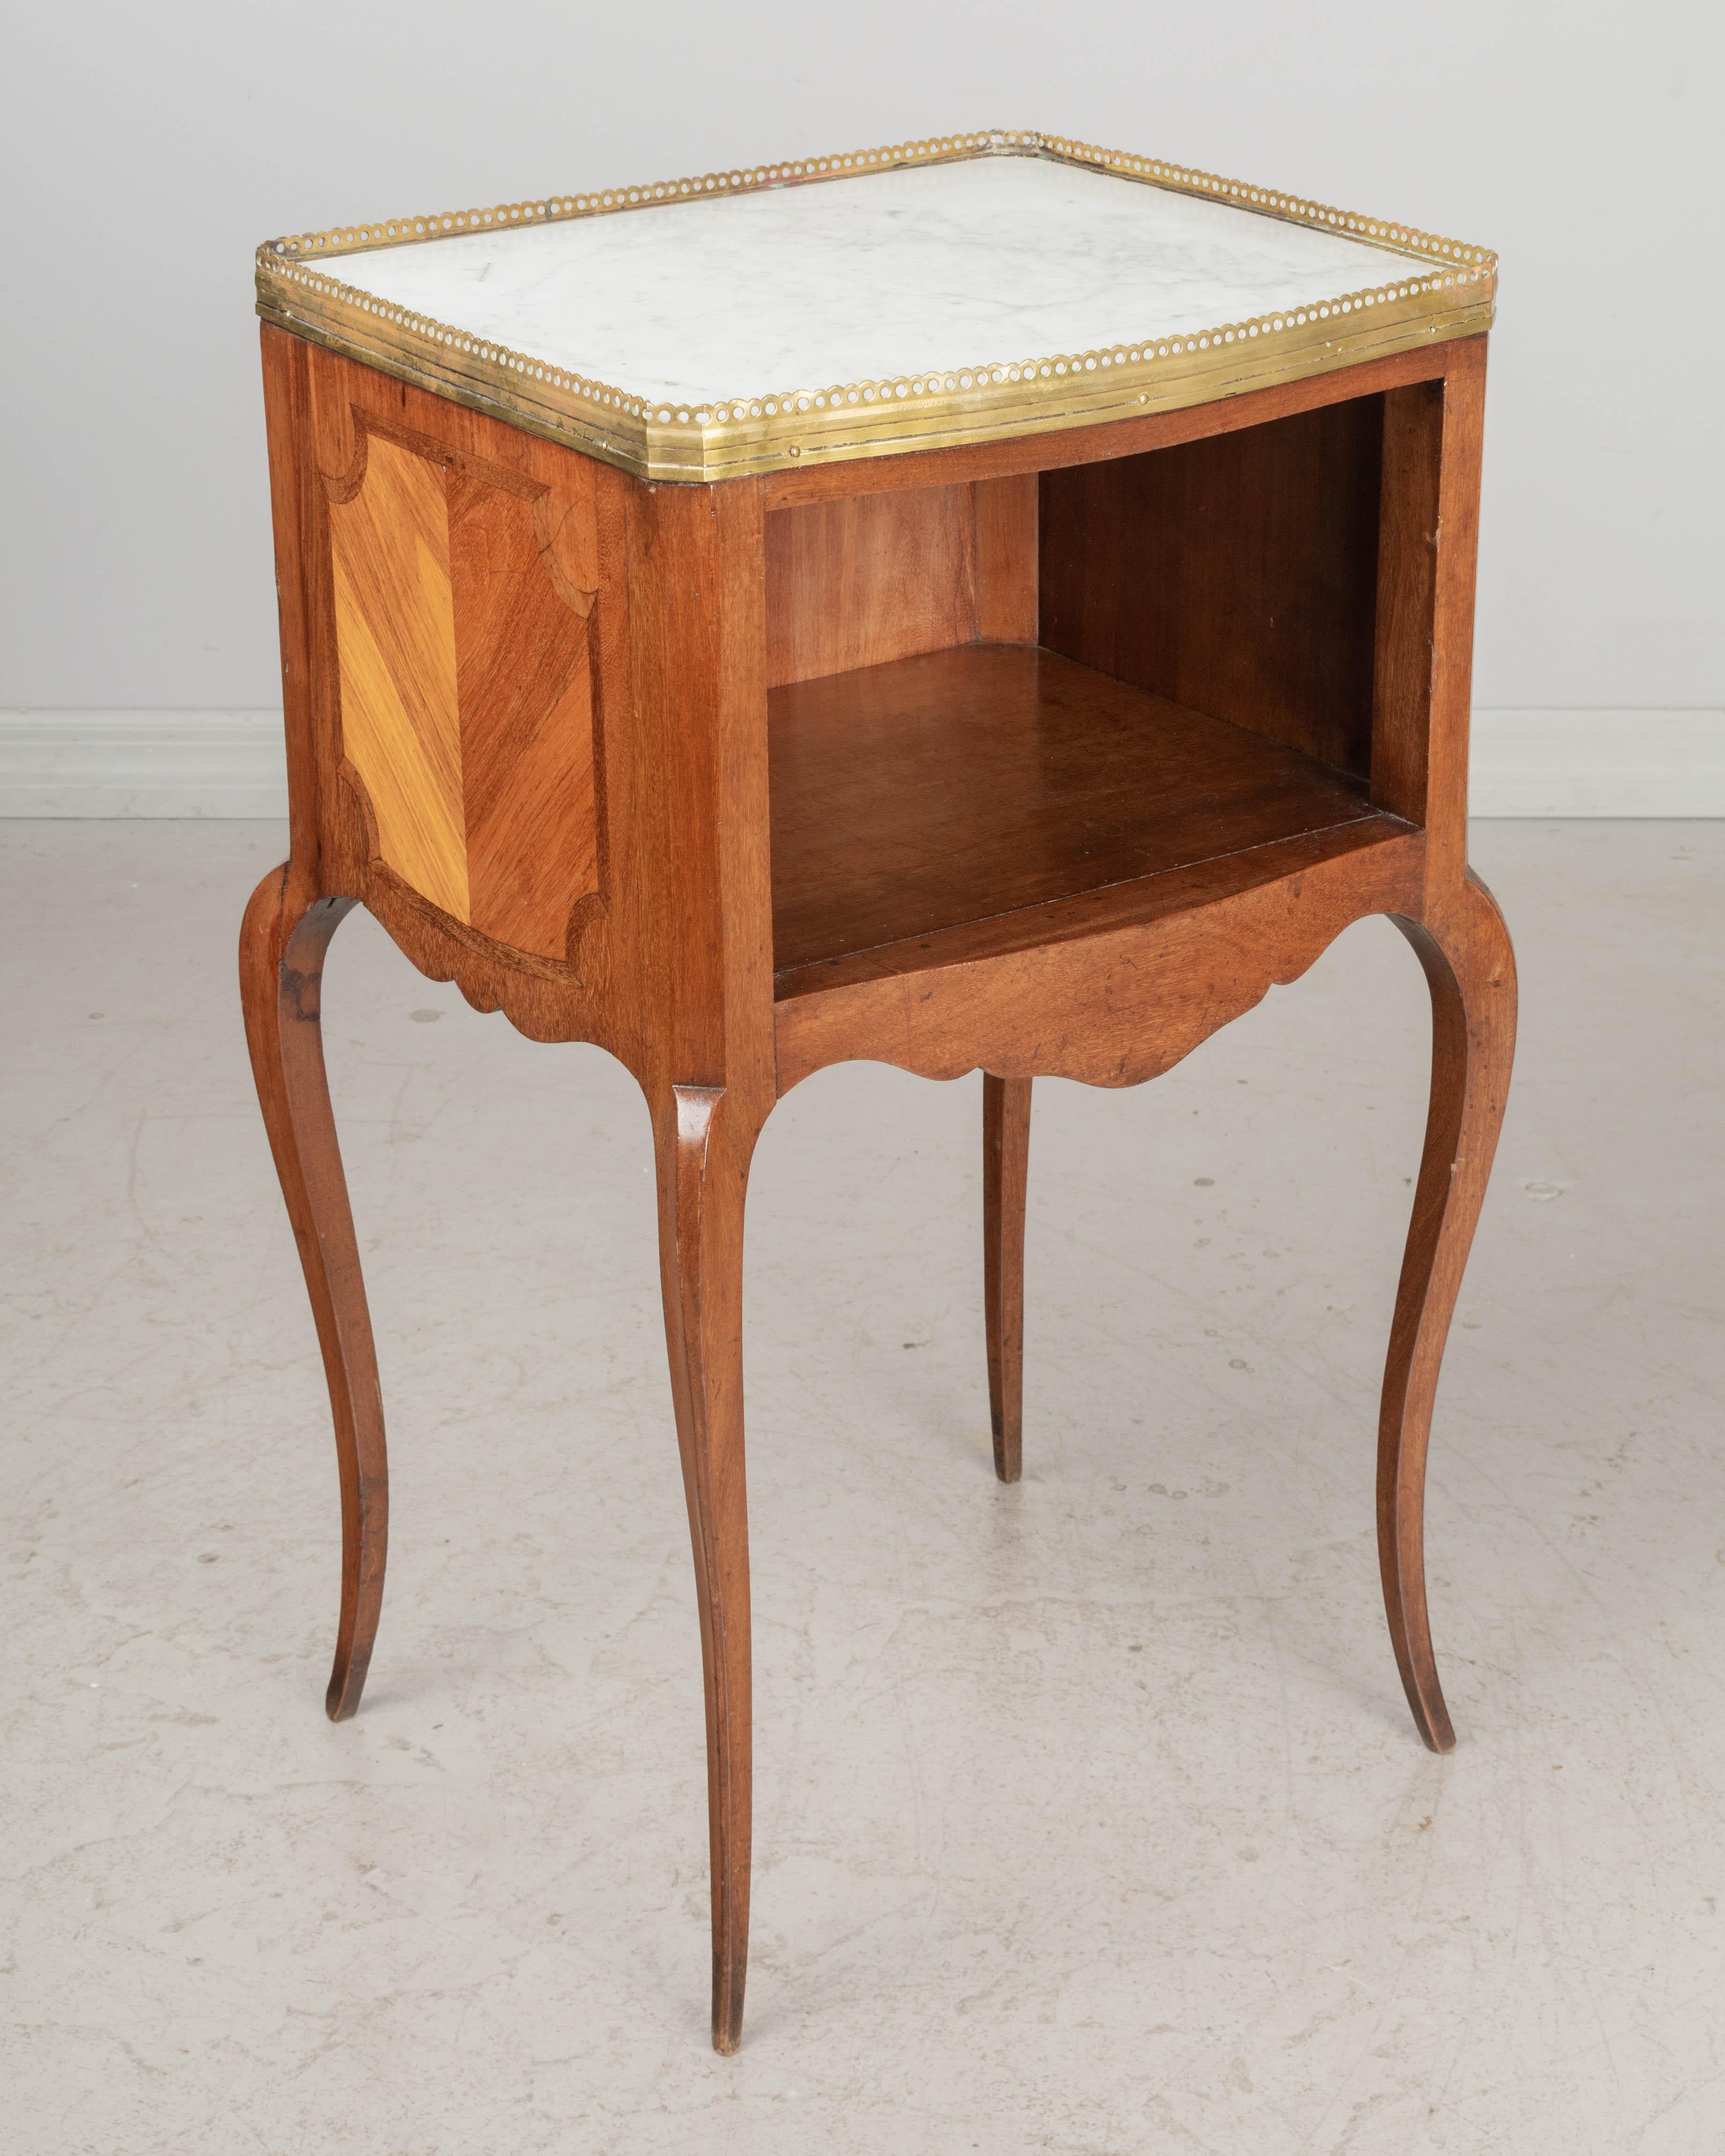 A Louis XV style French marquetry side table made of inlaid veneer of mahogany. Open niche in front and finished back. White marble top with polished bronze gallery. Elegant slender cabriole legs. Good quality and craftsmanship. circa 1920-1930.